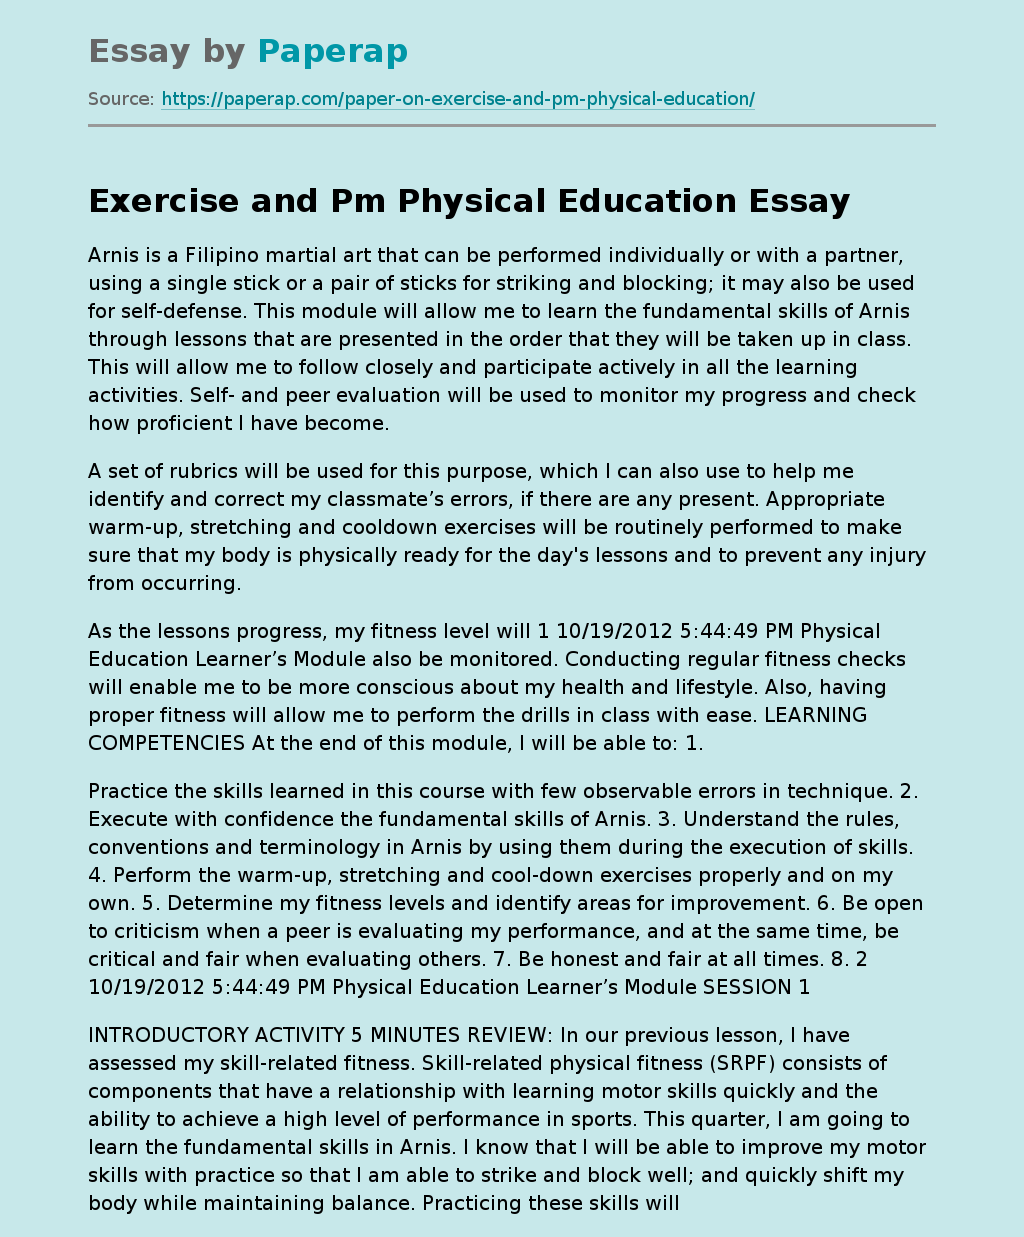 Exercise and Pm Physical Education